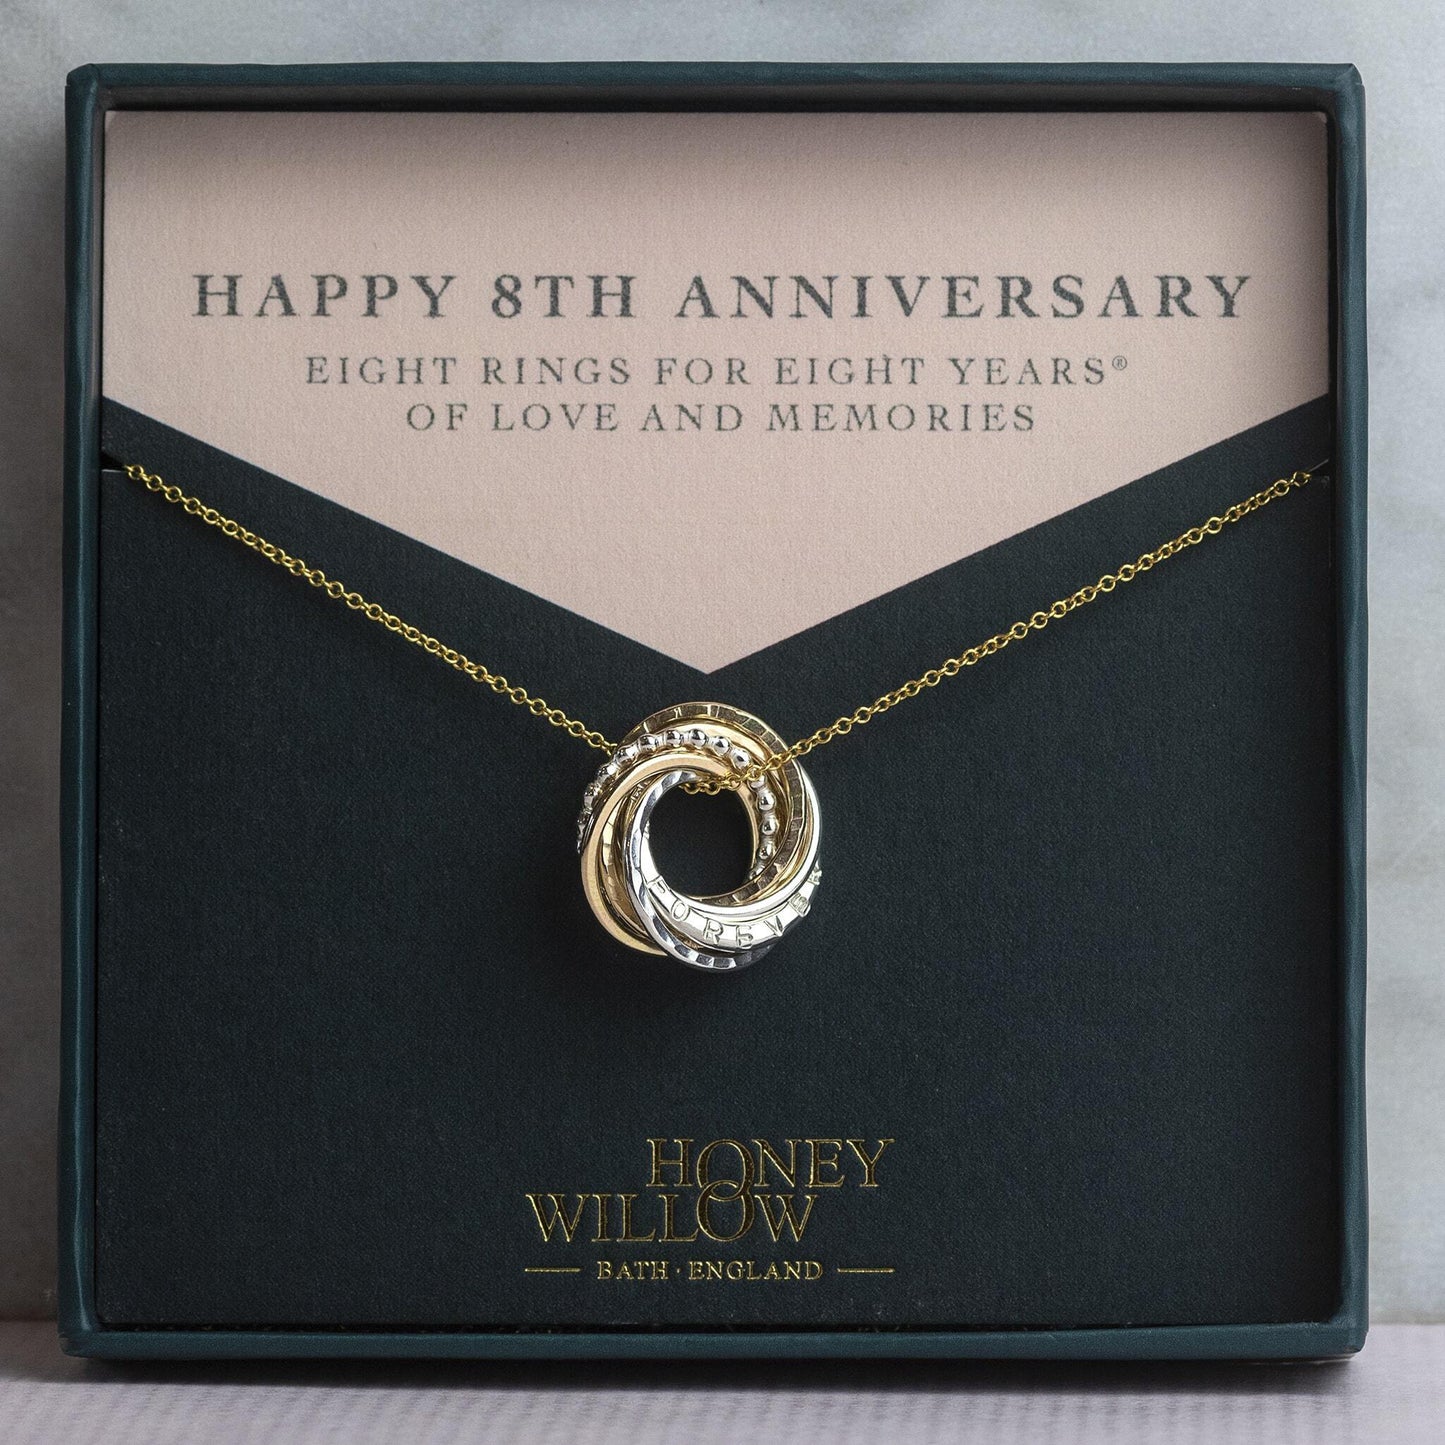 Personalised 8th Anniversary Necklace - Hand-Stamped - The Original 8 Rings for 8 Years Necklace - Petite Silver & Gold